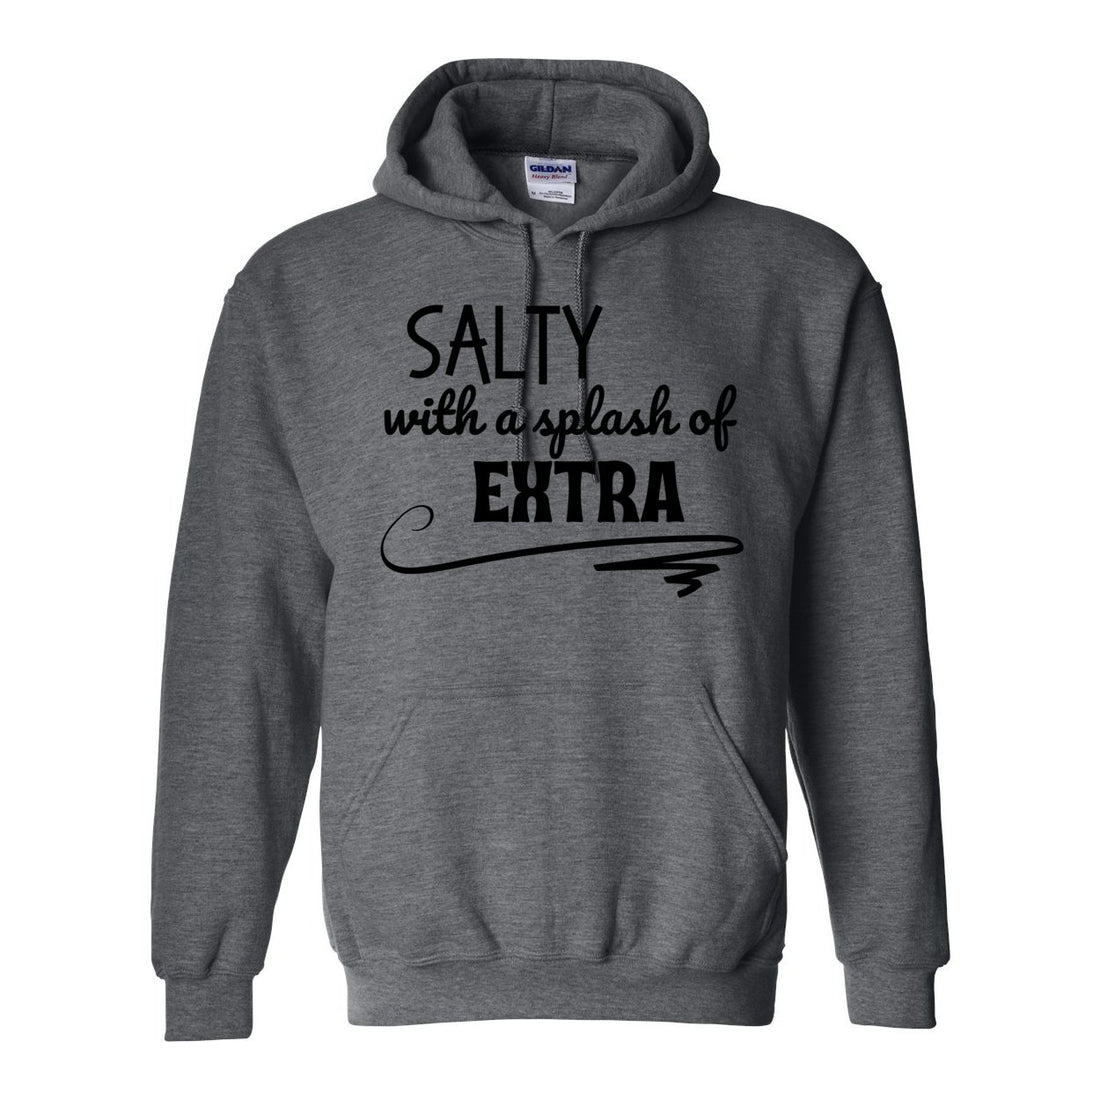 Salty With A Splash Of ExtraHooded Sweatshirt - Sweaters/Hoodies - Positively Sassy - Salty With A Splash Of ExtraHooded Sweatshirt